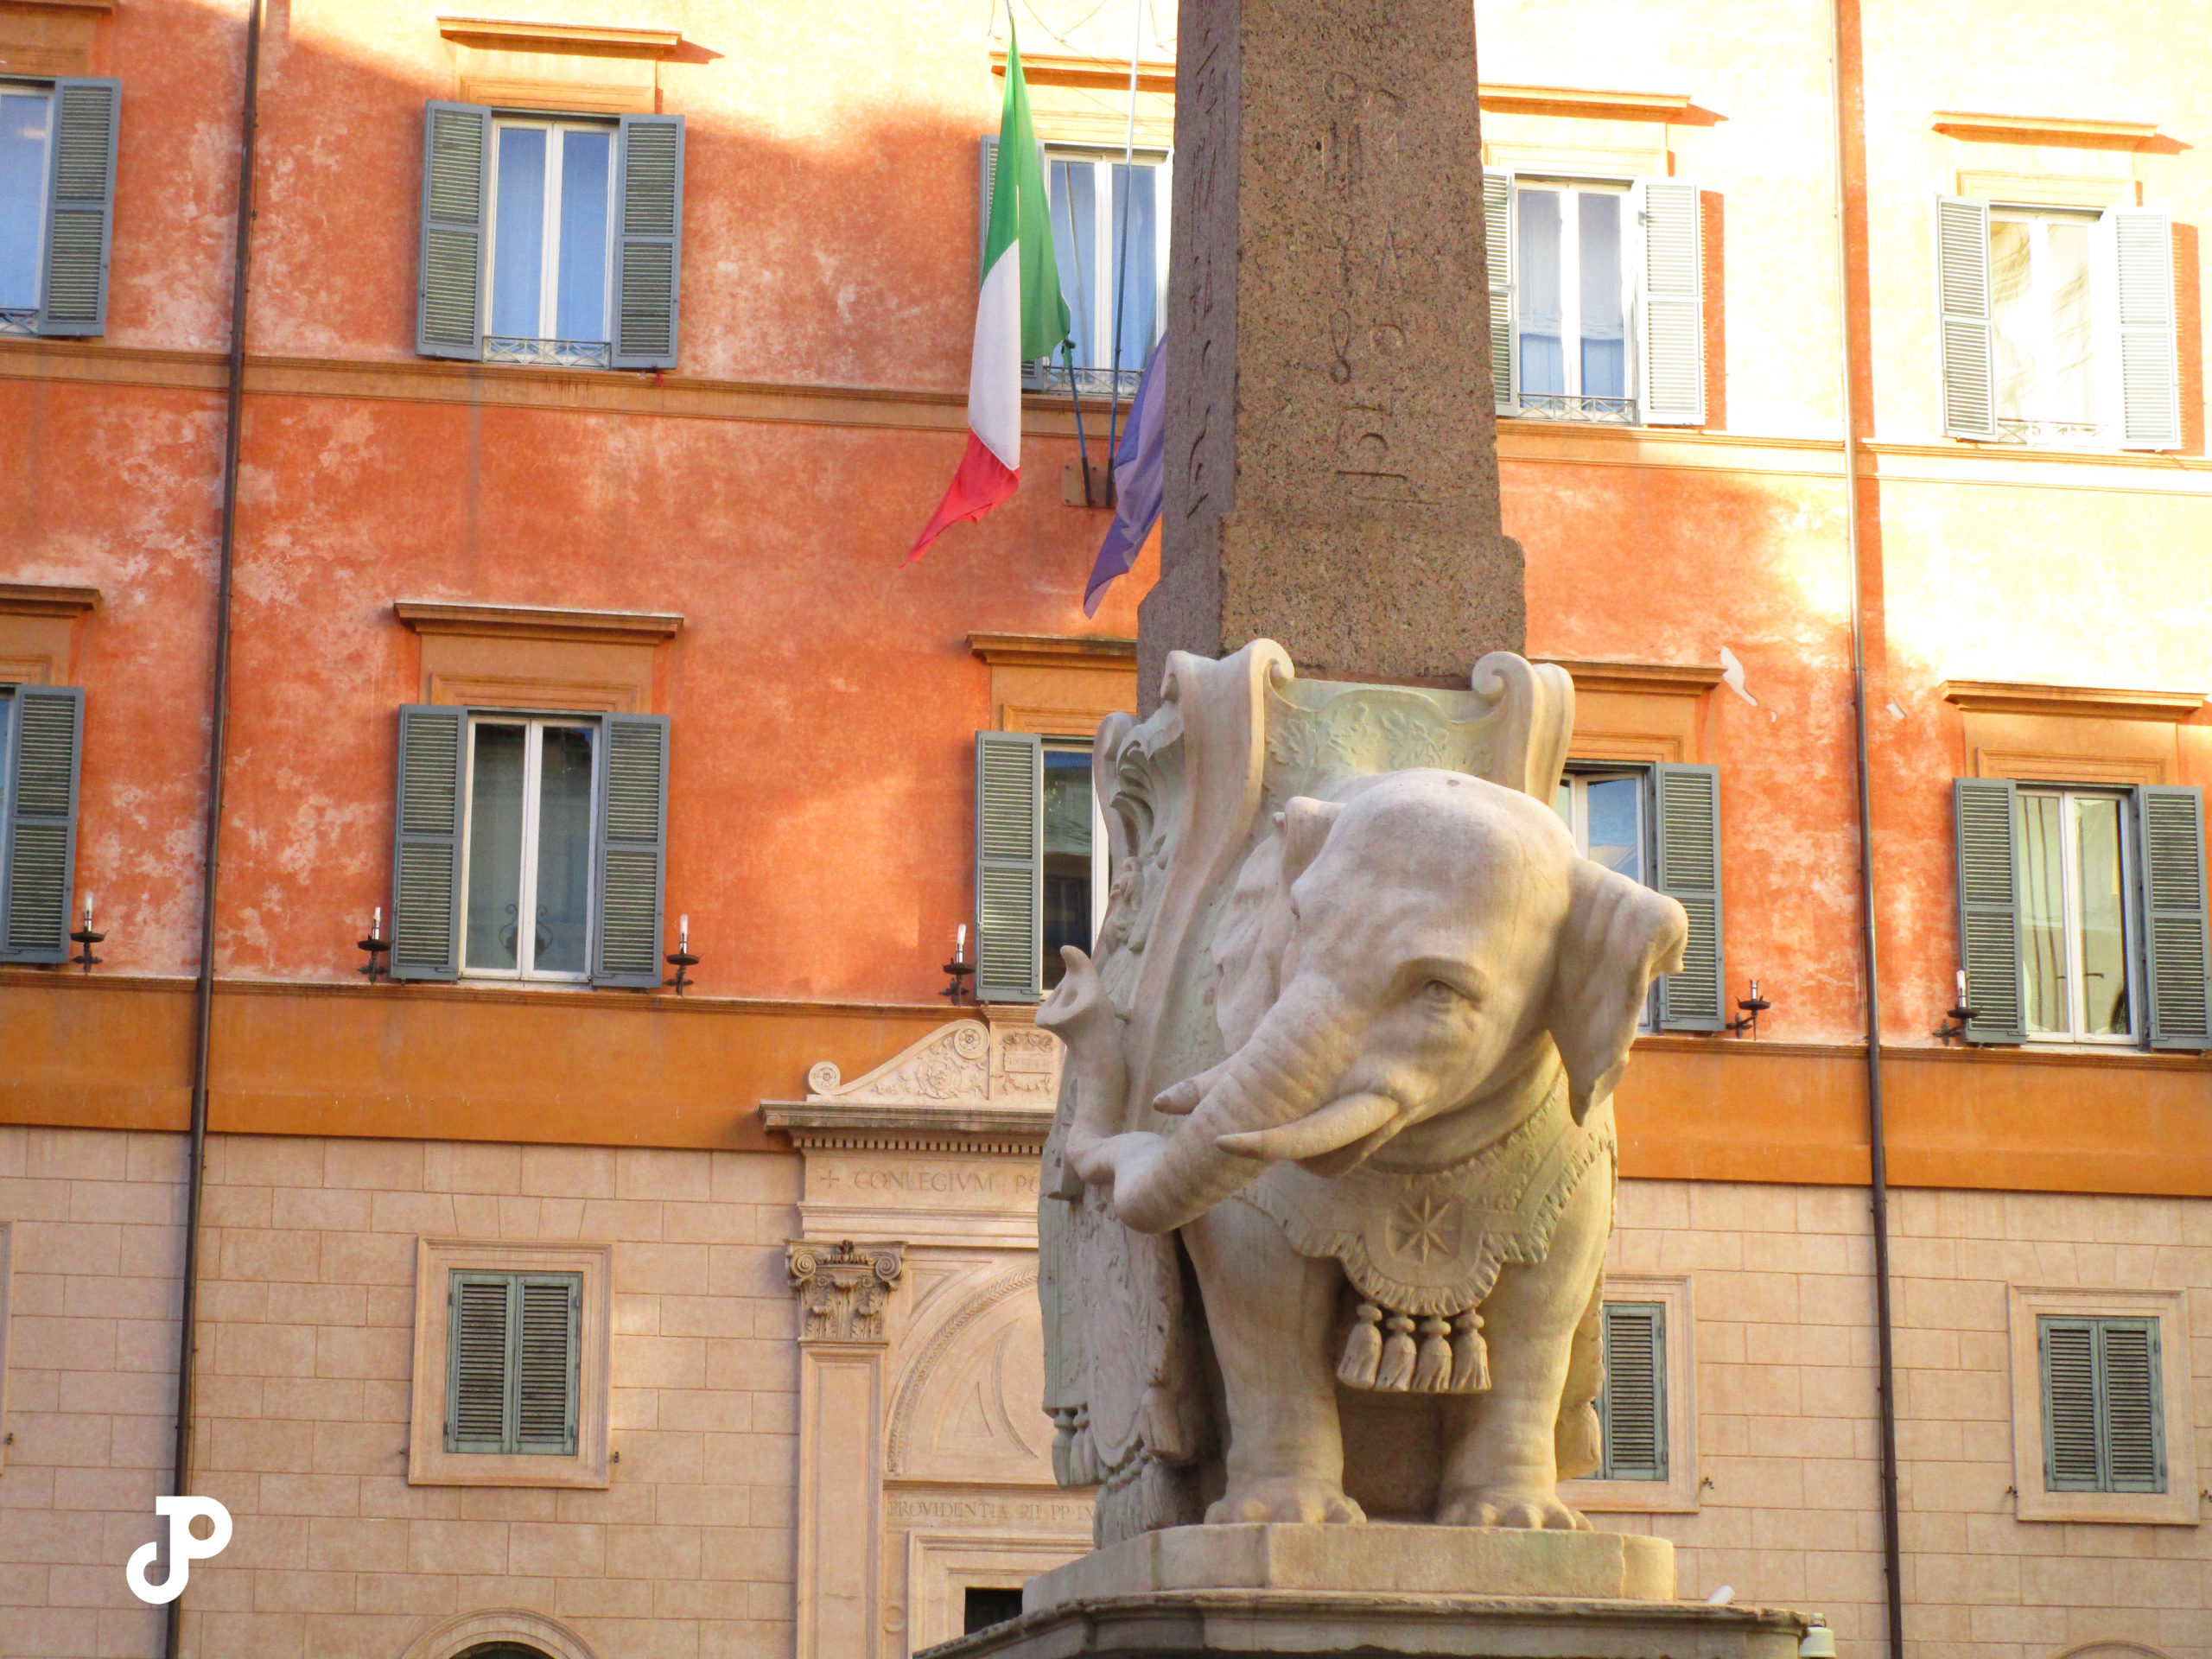 a marble elephant statue in the foreground, and in the background an orange building with an Italian flag